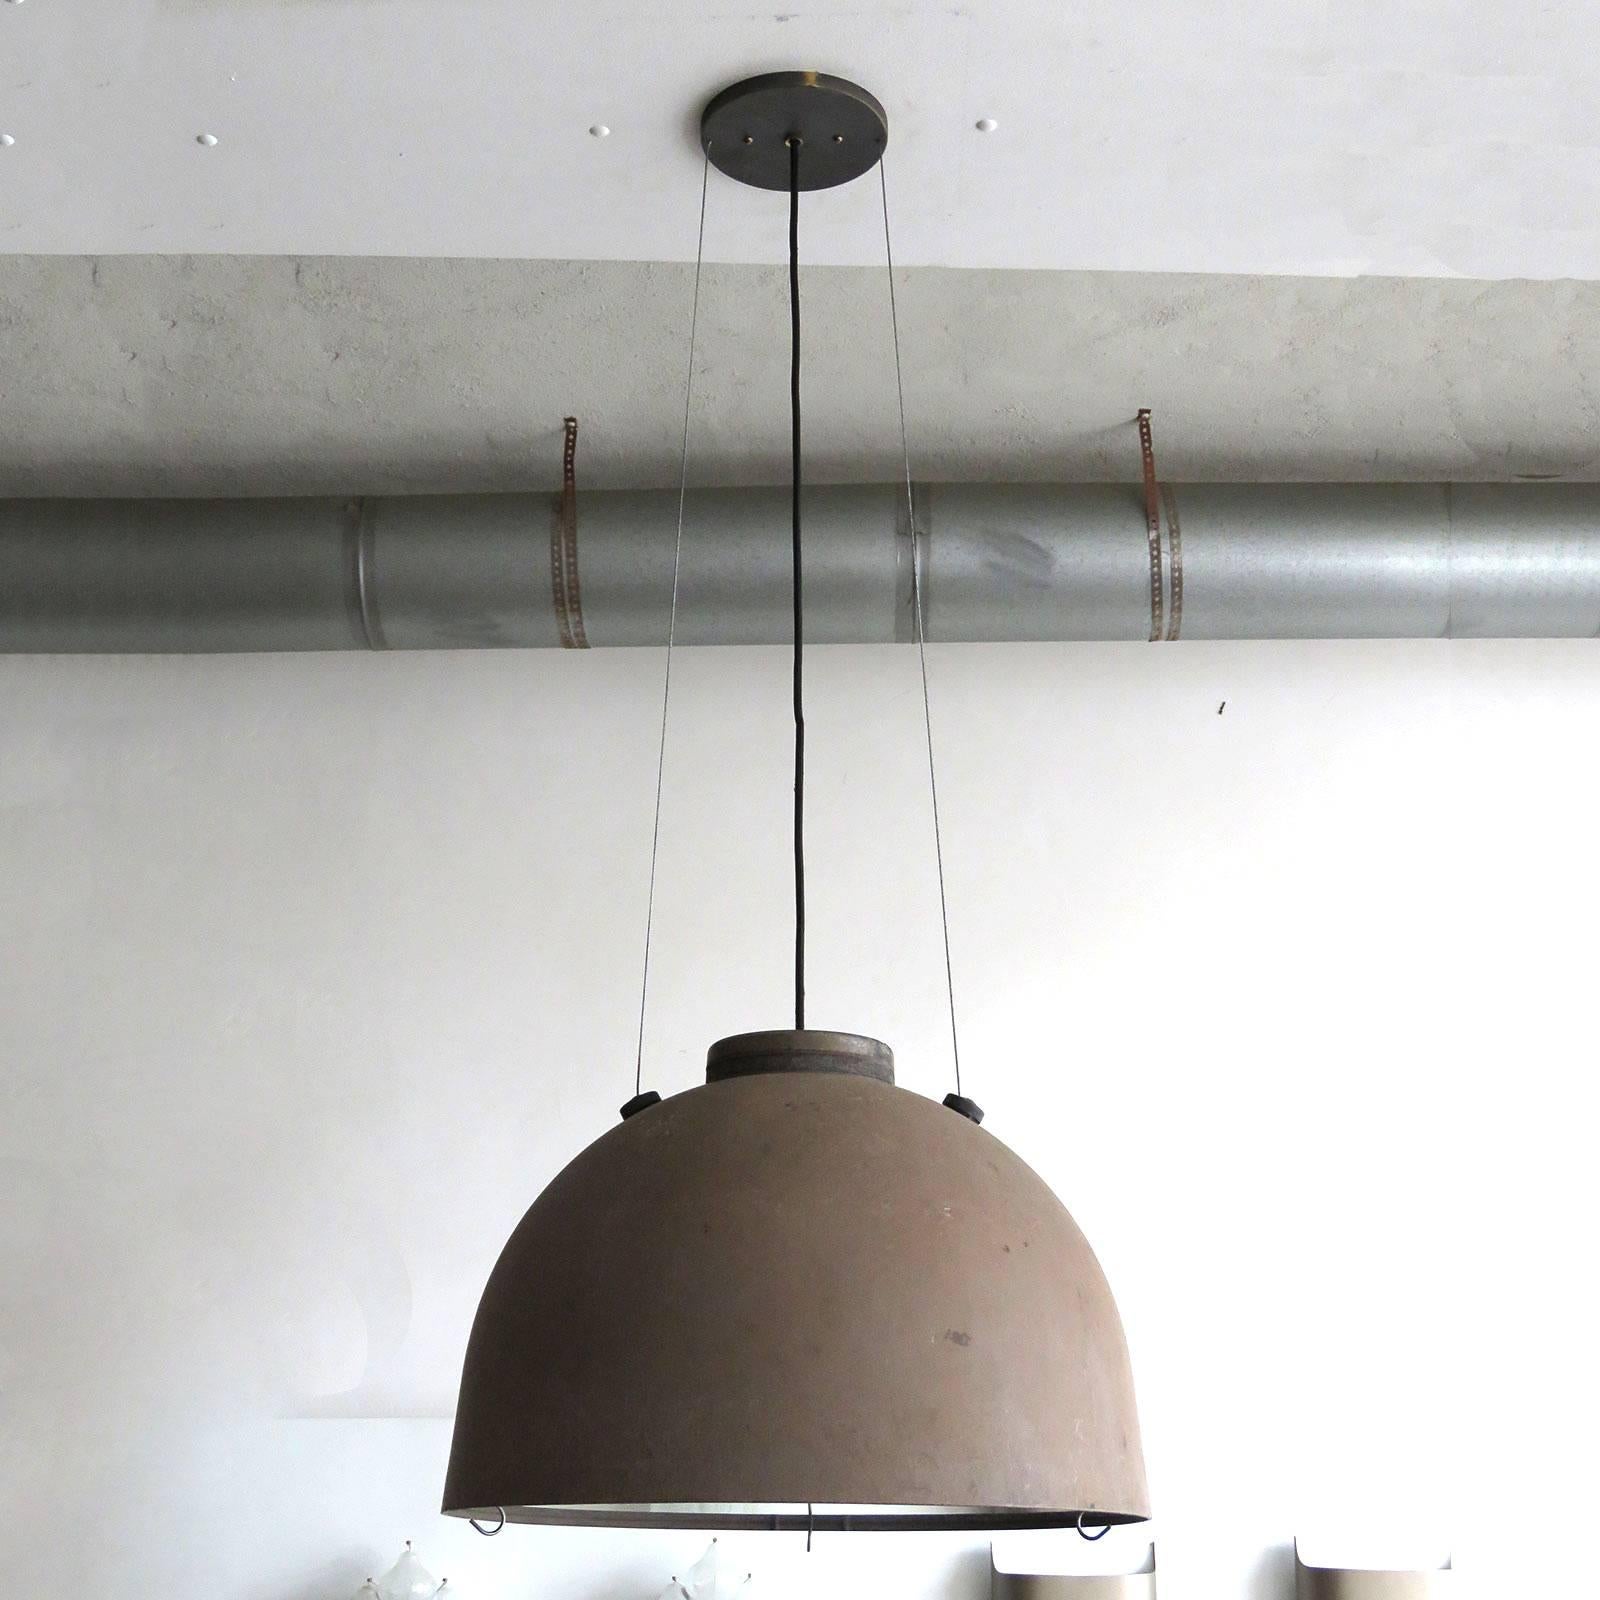 Large-scale pendant lights designed by Otto Kaszner, manufactured by Philips Denmark in the 1970s for the streets in Copenhagen, Denmark, patinated fiberglass dome with glass cover, suspended from steel cables, total height can be customized. Priced